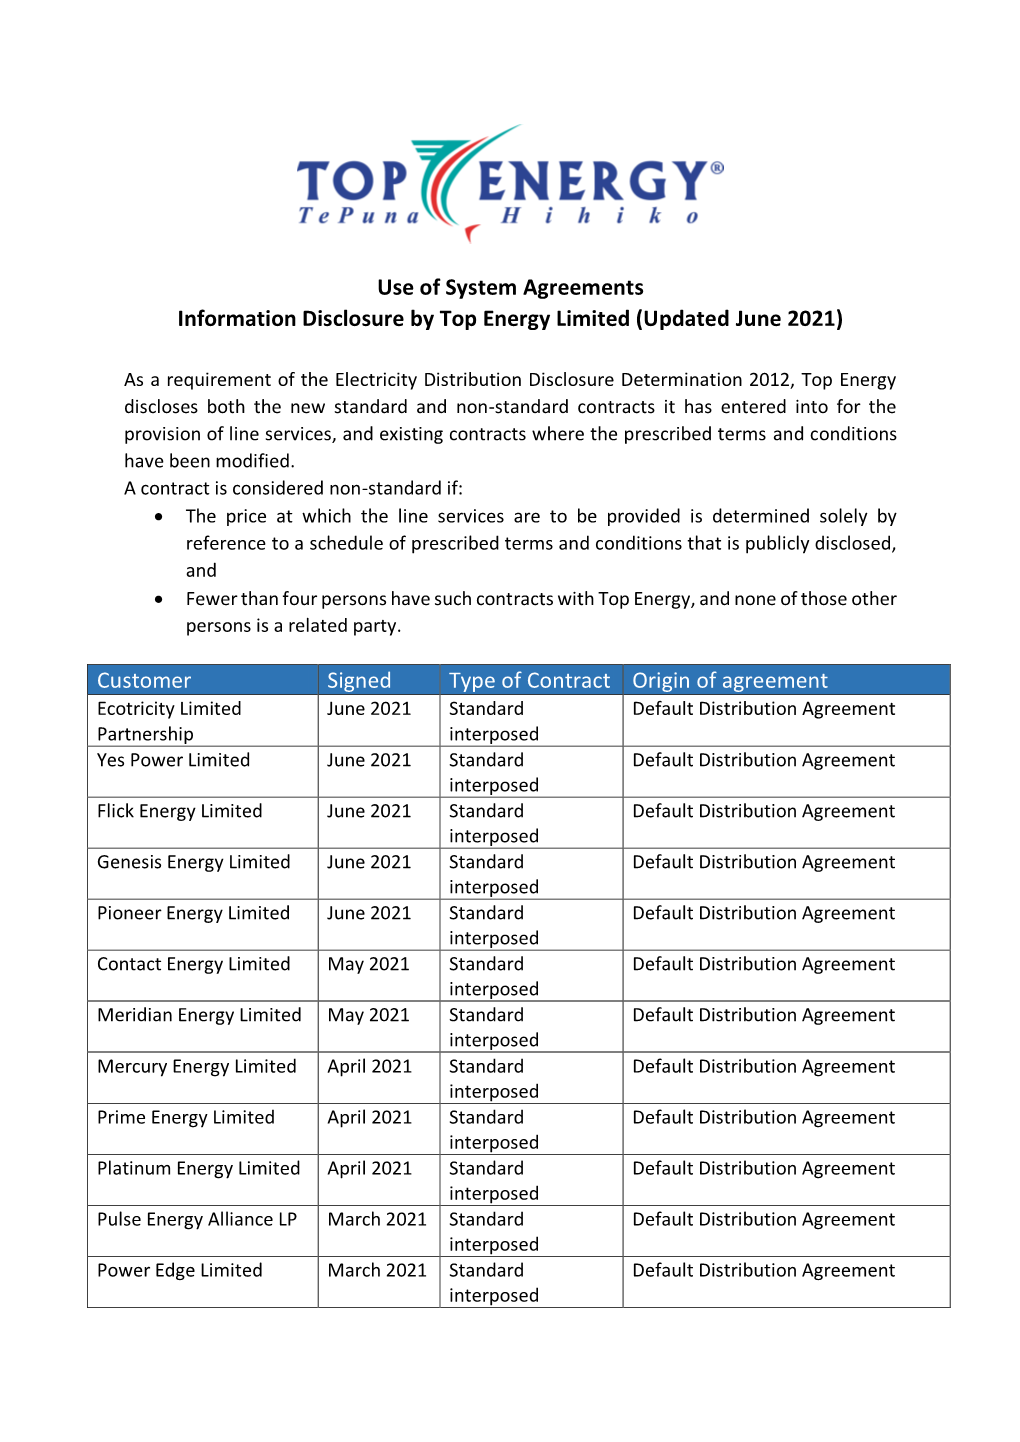 Use of System Agreements Information Disclosure by Top Energy Limited (Updated June 2021)